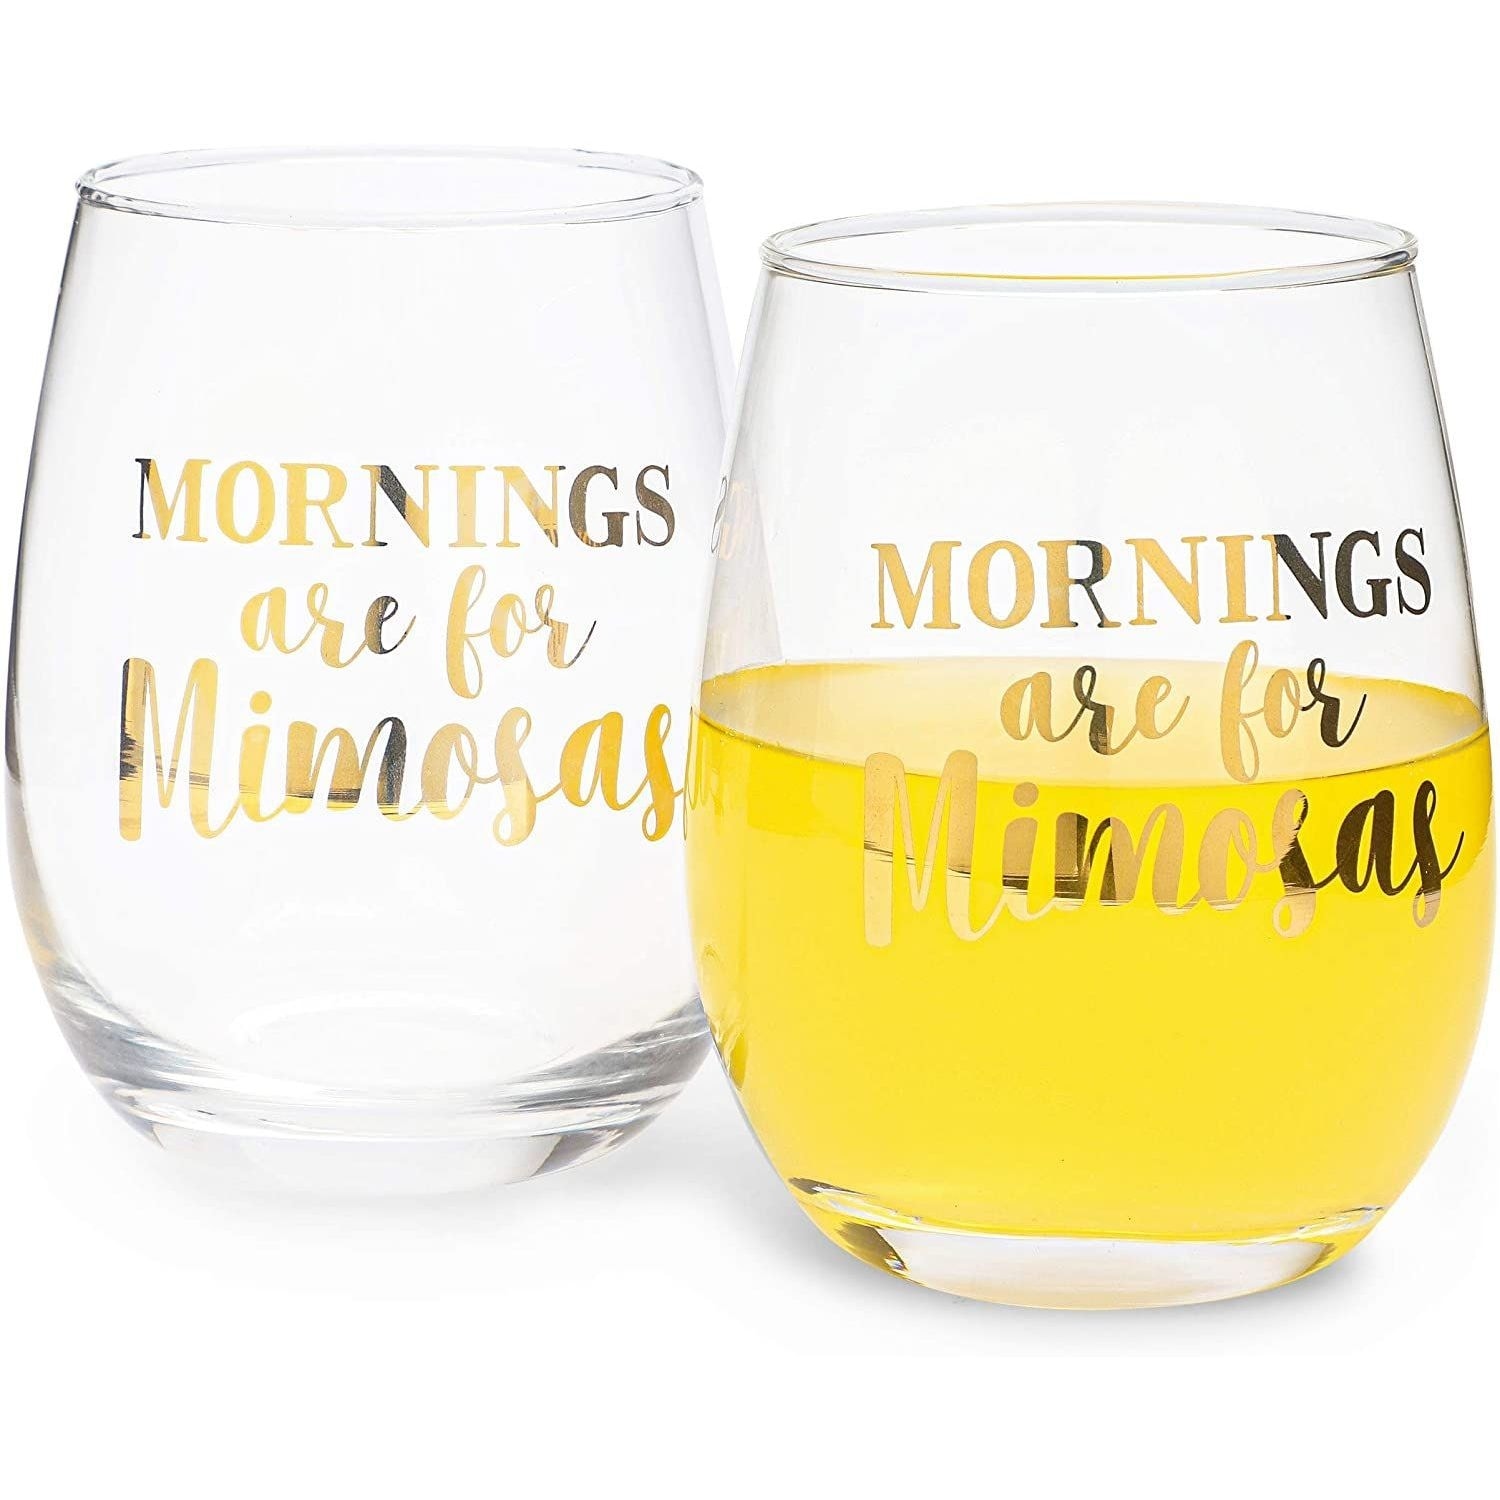 https://ak1.ostkcdn.com/images/products/is/images/direct/571df14cee81102e26dbbe843b76e301556cc94c/2-Pack-Mornings-Are-for-Mimosas-Stemless-Wine-Glass-for-Red-or-White-Wine%2C-16-oz.jpg